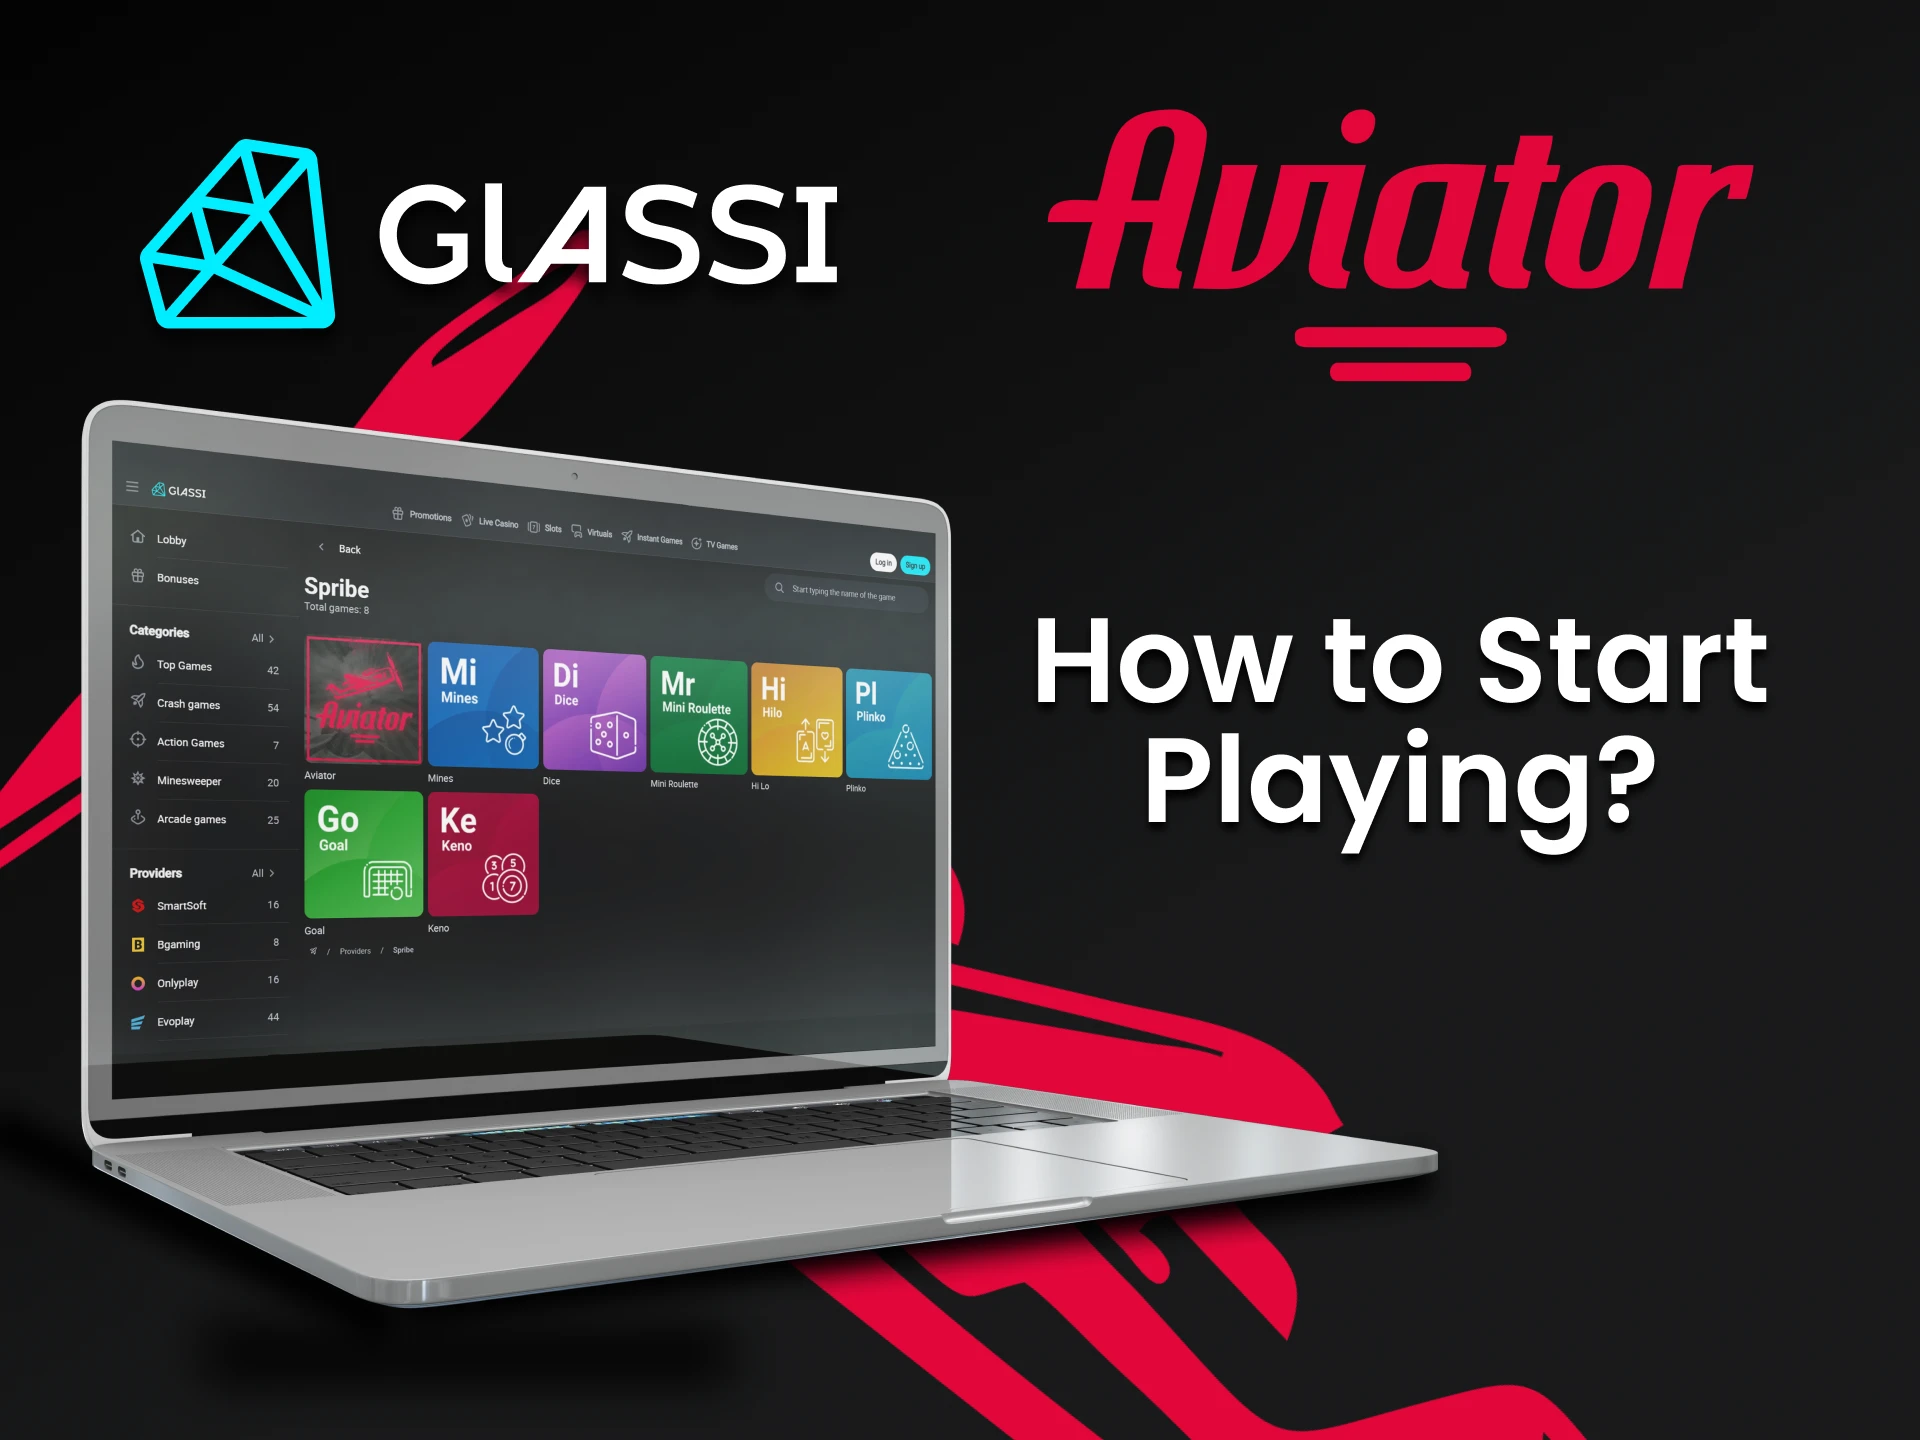 We will show you how to start playing Aviator at Glassi Casino.